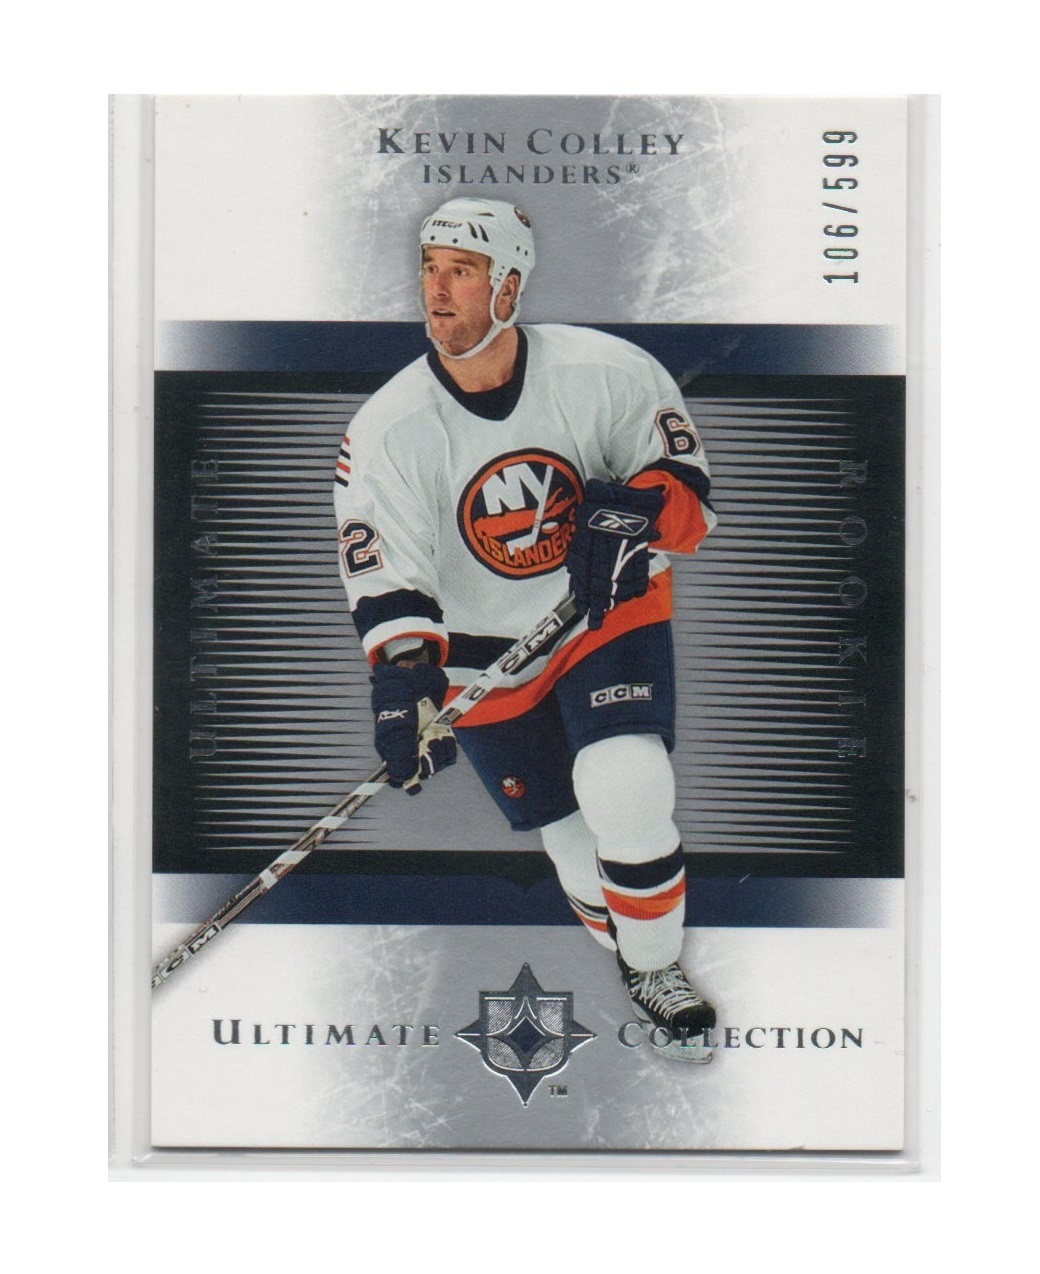 2005-06 Ultimate Collection #156 Kevin Colley RC (30-X256-ISLANDERS)